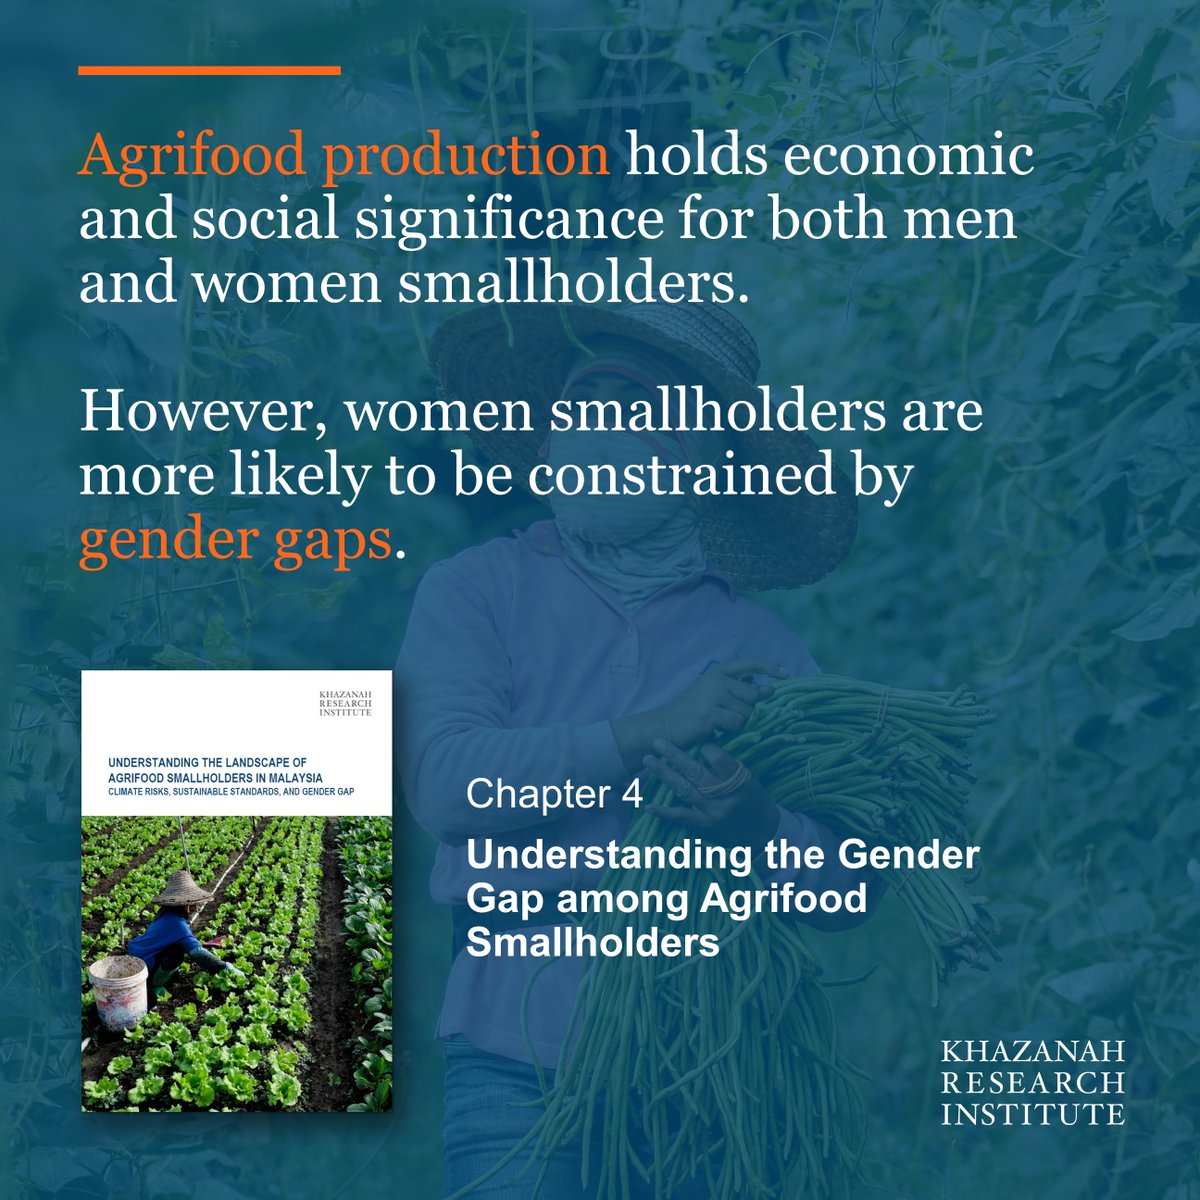 1/7) 

KRI’s latest report showed that #GenderGaps prevail among #agrifood #smallholders in Malaysia, with women being more likely to fall behind in several aspects.
#KRI #AdvancingMalaysia